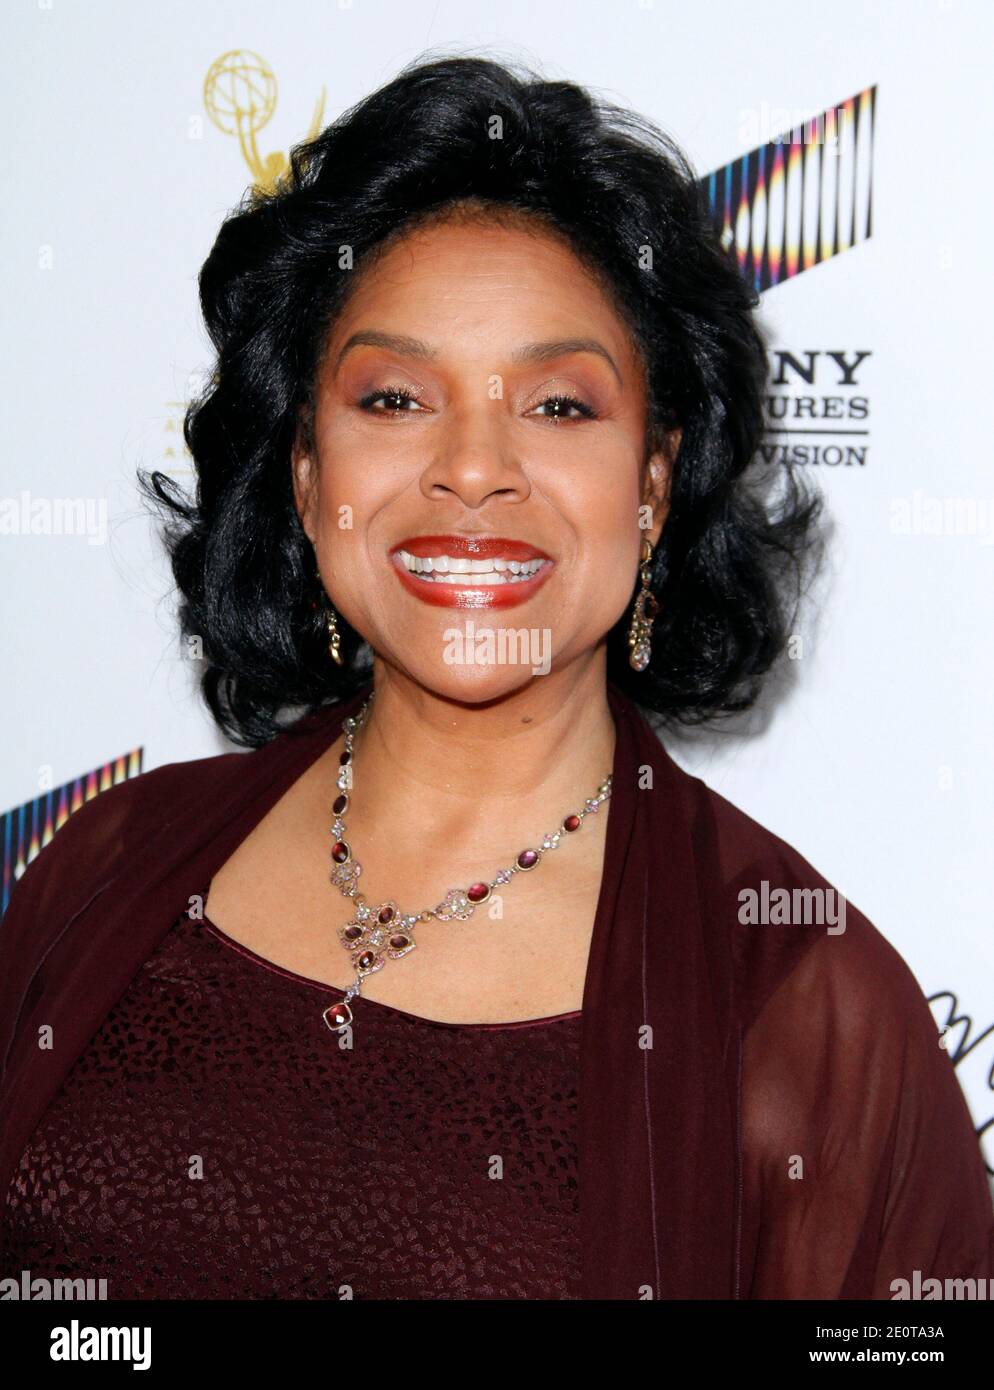 Phylicia Rashad attends the Steel Magnolias Premiere at the Paris Theater in New York City, NY, USA, on October 3, 2012. Photo by Donna Ward/ABACAPRESS.COM Stock Photo